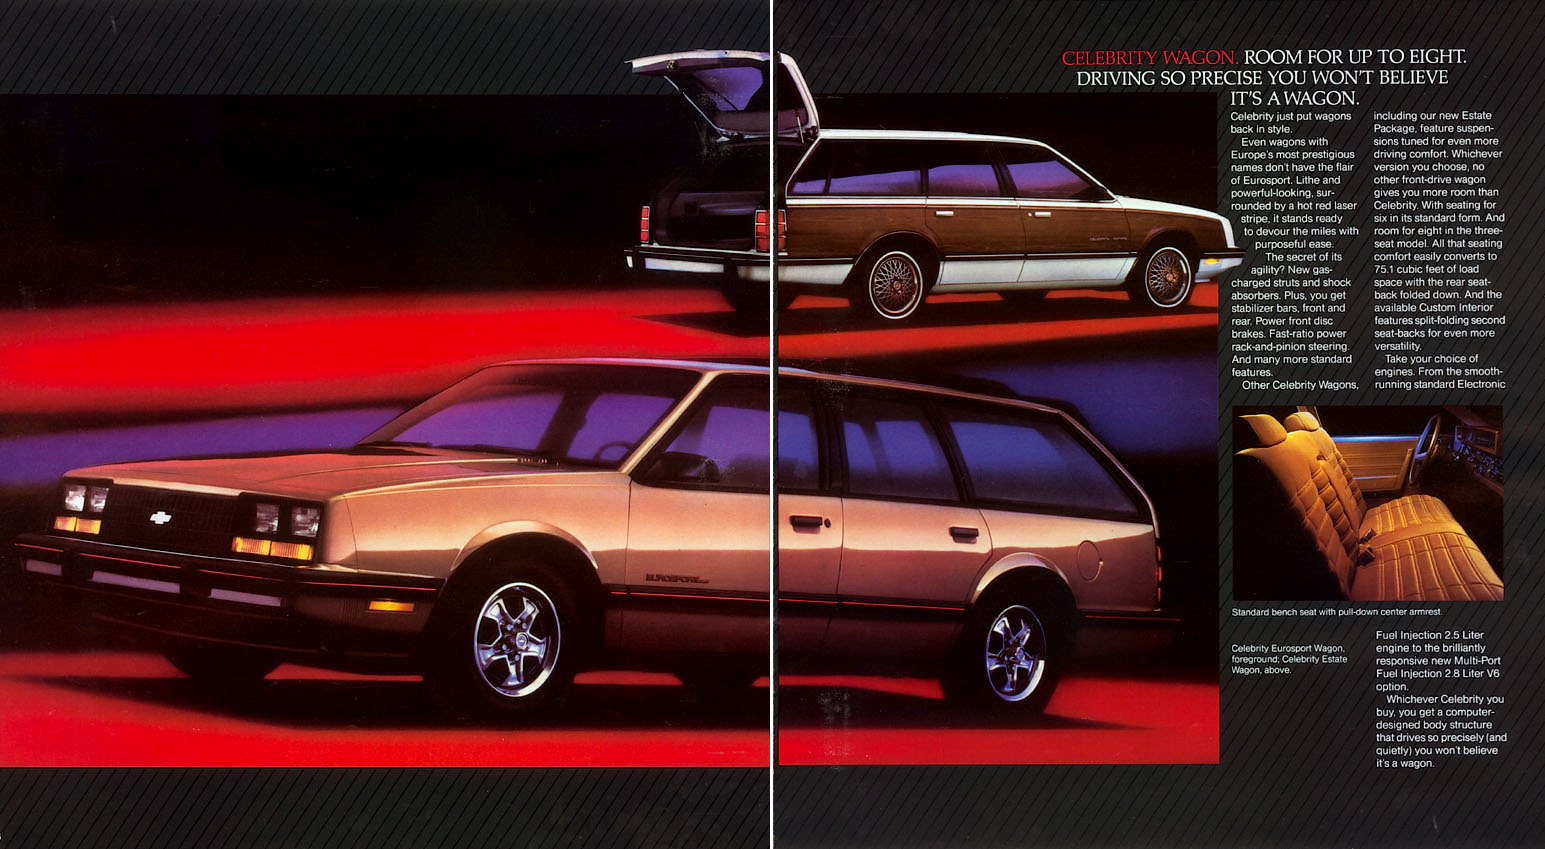 1985 Chevrolet Wagons Brochure Page 8